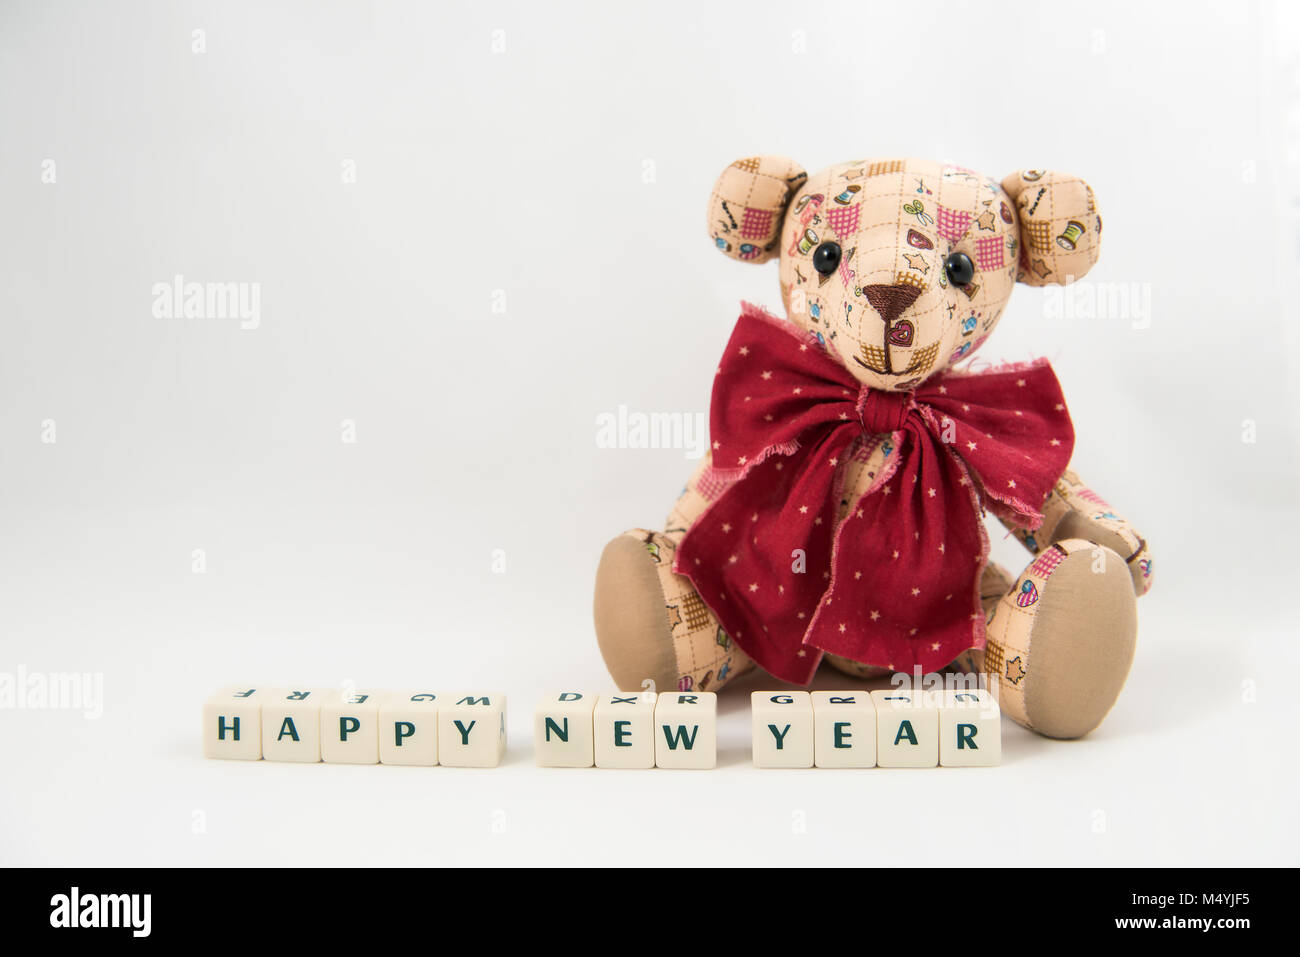 Happy NEW Year white cube text and Teddy bear Stock Photo